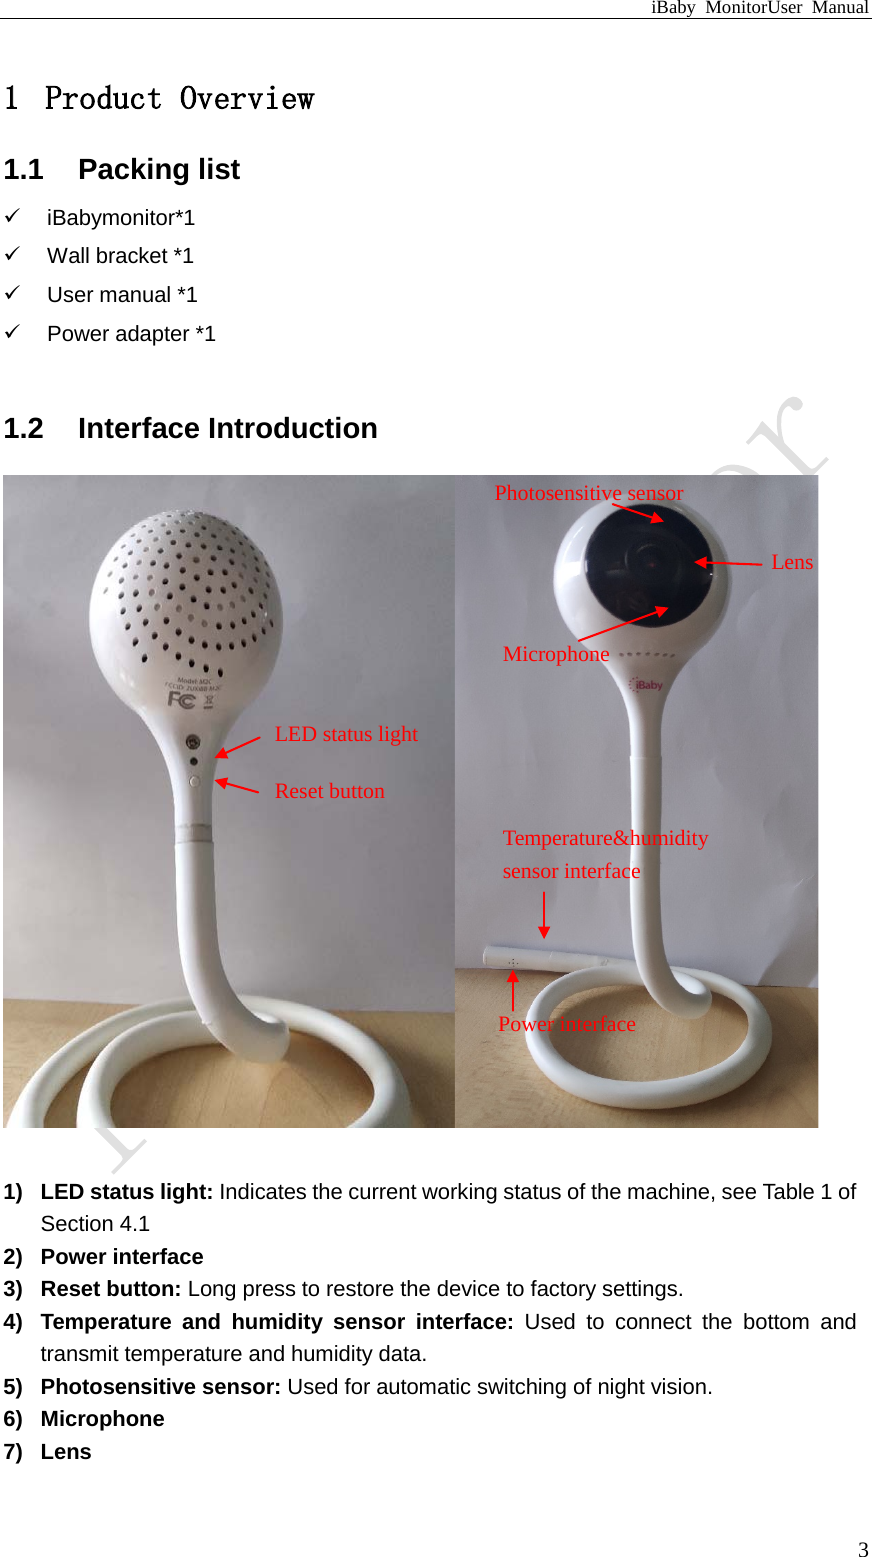 iBaby MonitorUser Manual  3 1 Product Overview 1.1 Packing list  iBabymonitor*1  Wall bracket *1  User manual *1   Power adapter *1  1.2 Interface Introduction        1) LED status light: Indicates the current working status of the machine, see Table 1 of Section 4.1 2) Power interface 3) Reset button: Long press to restore the device to factory settings. 4) Temperature and humidity sensor interface: Used to connect the bottom and transmit temperature and humidity data. 5) Photosensitive sensor: Used for automatic switching of night vision. 6) Microphone 7) Lens LED status light  Microphone   Temperature&amp;humidity   sensor interface Power interface  Reset button Photosensitive sensor Lens 